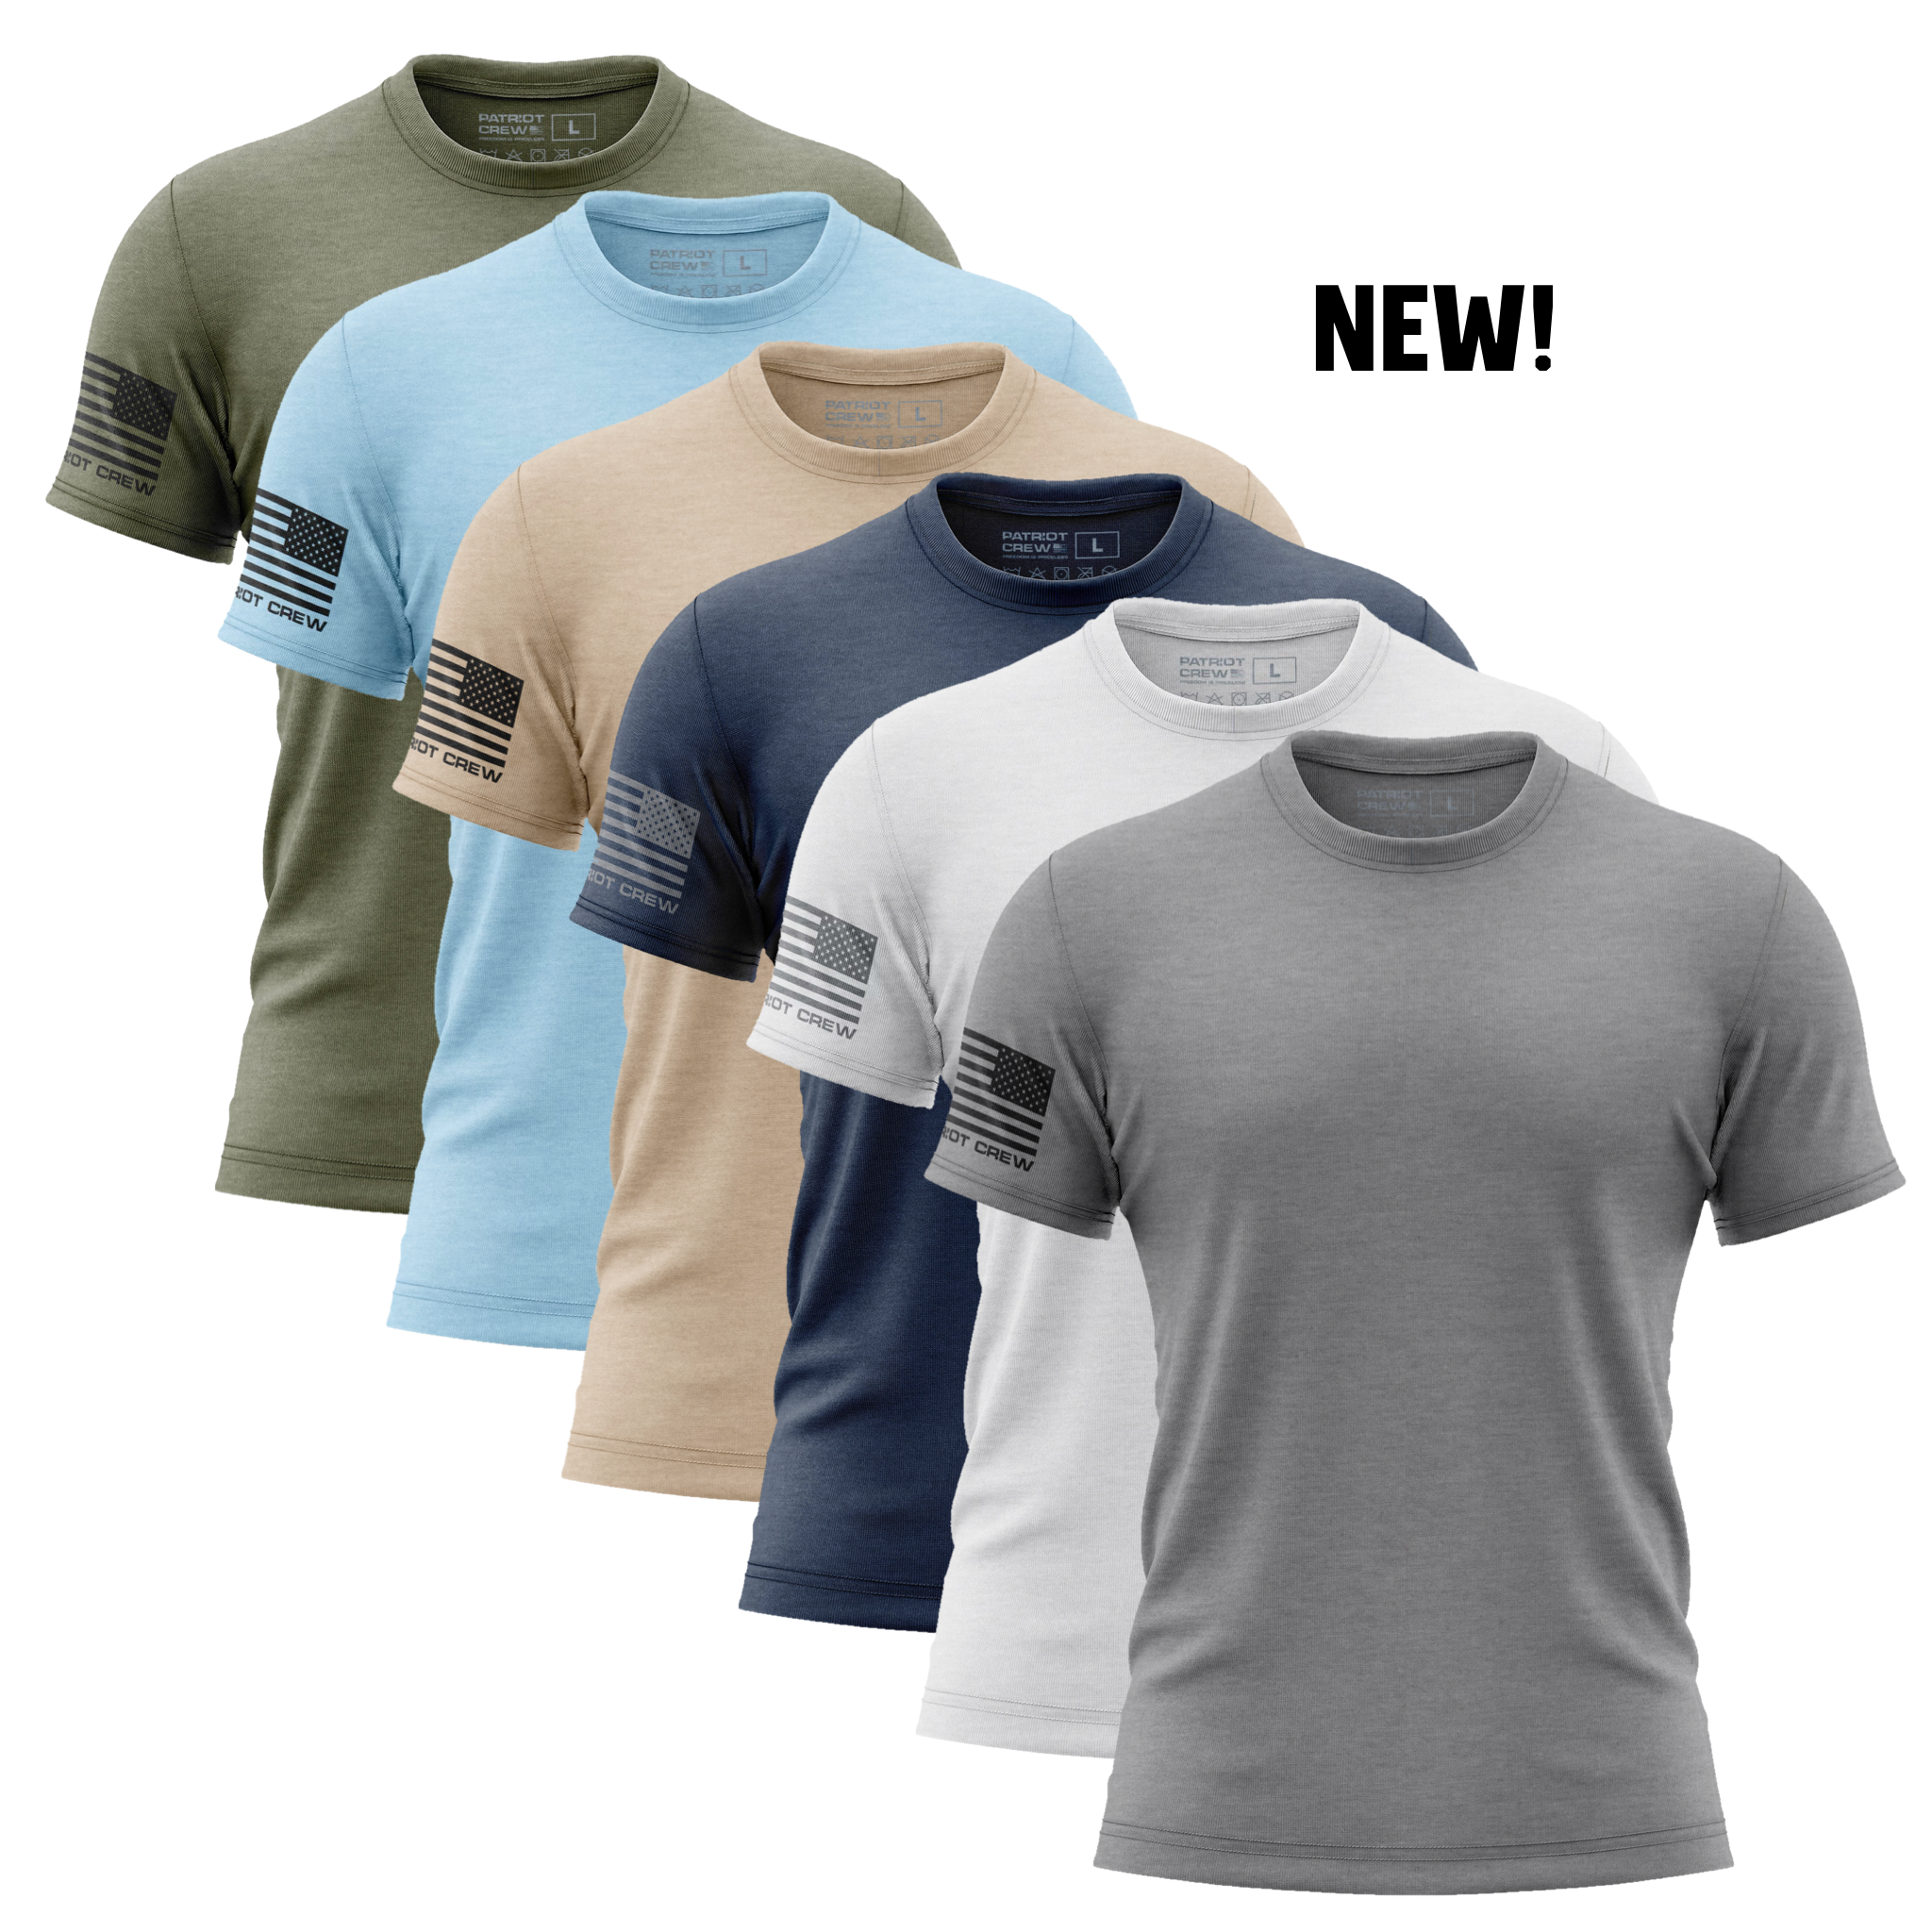 Image of Spring T-Shirt (6 Pack)